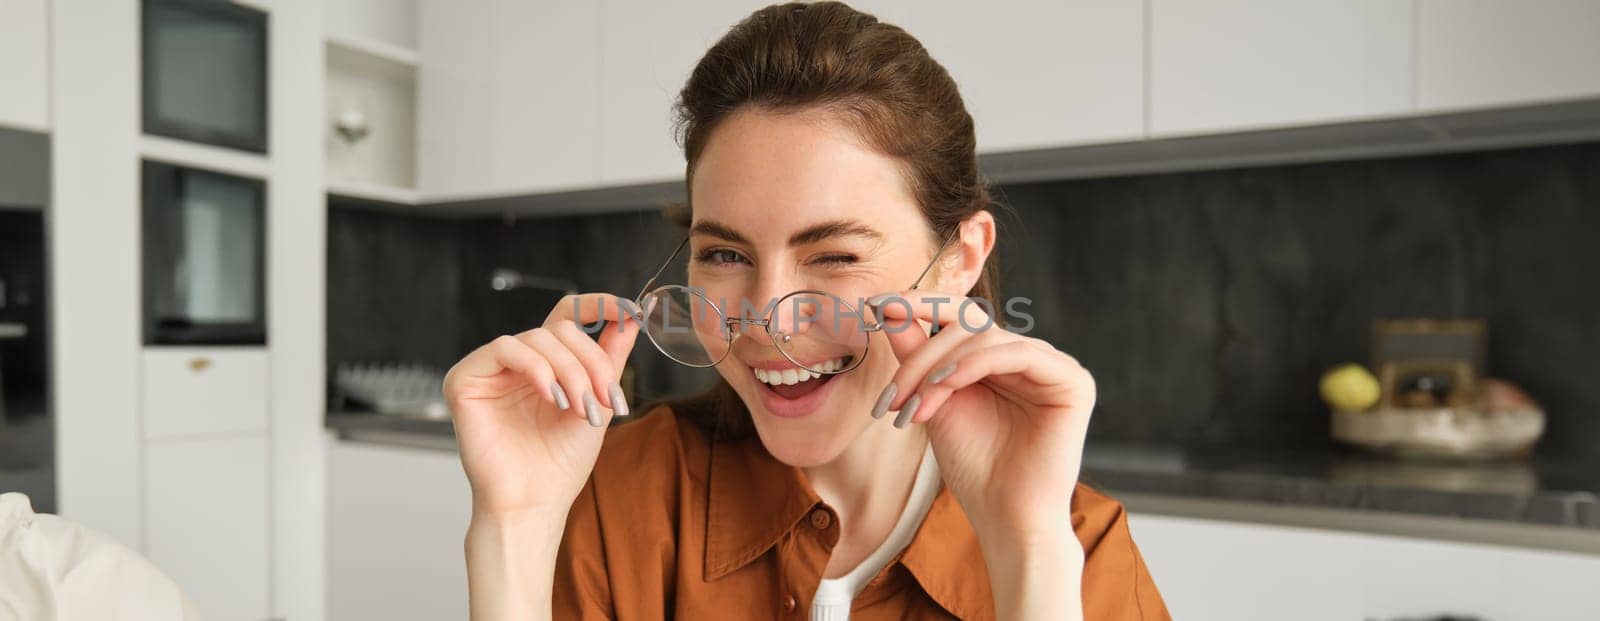 Close up portrait of beautiful brunette woman at home, smiling, wearing her glasses and laughing.